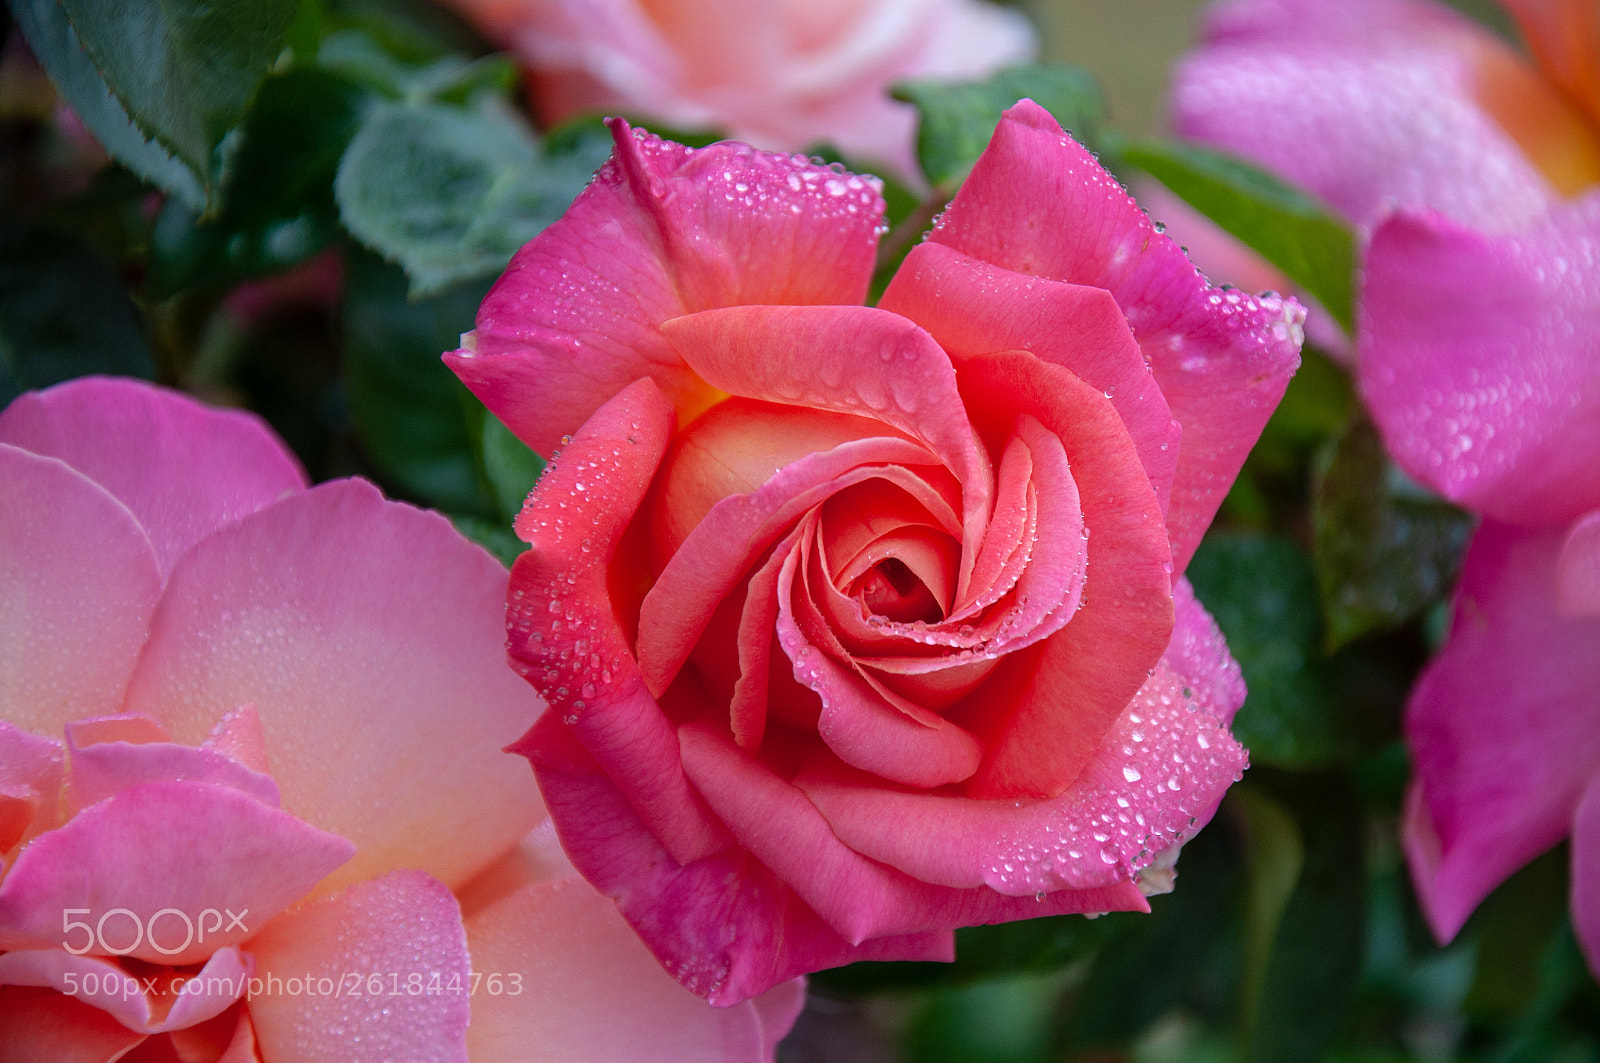 Nikon D90 sample photo. Bright pink dewy rose photography